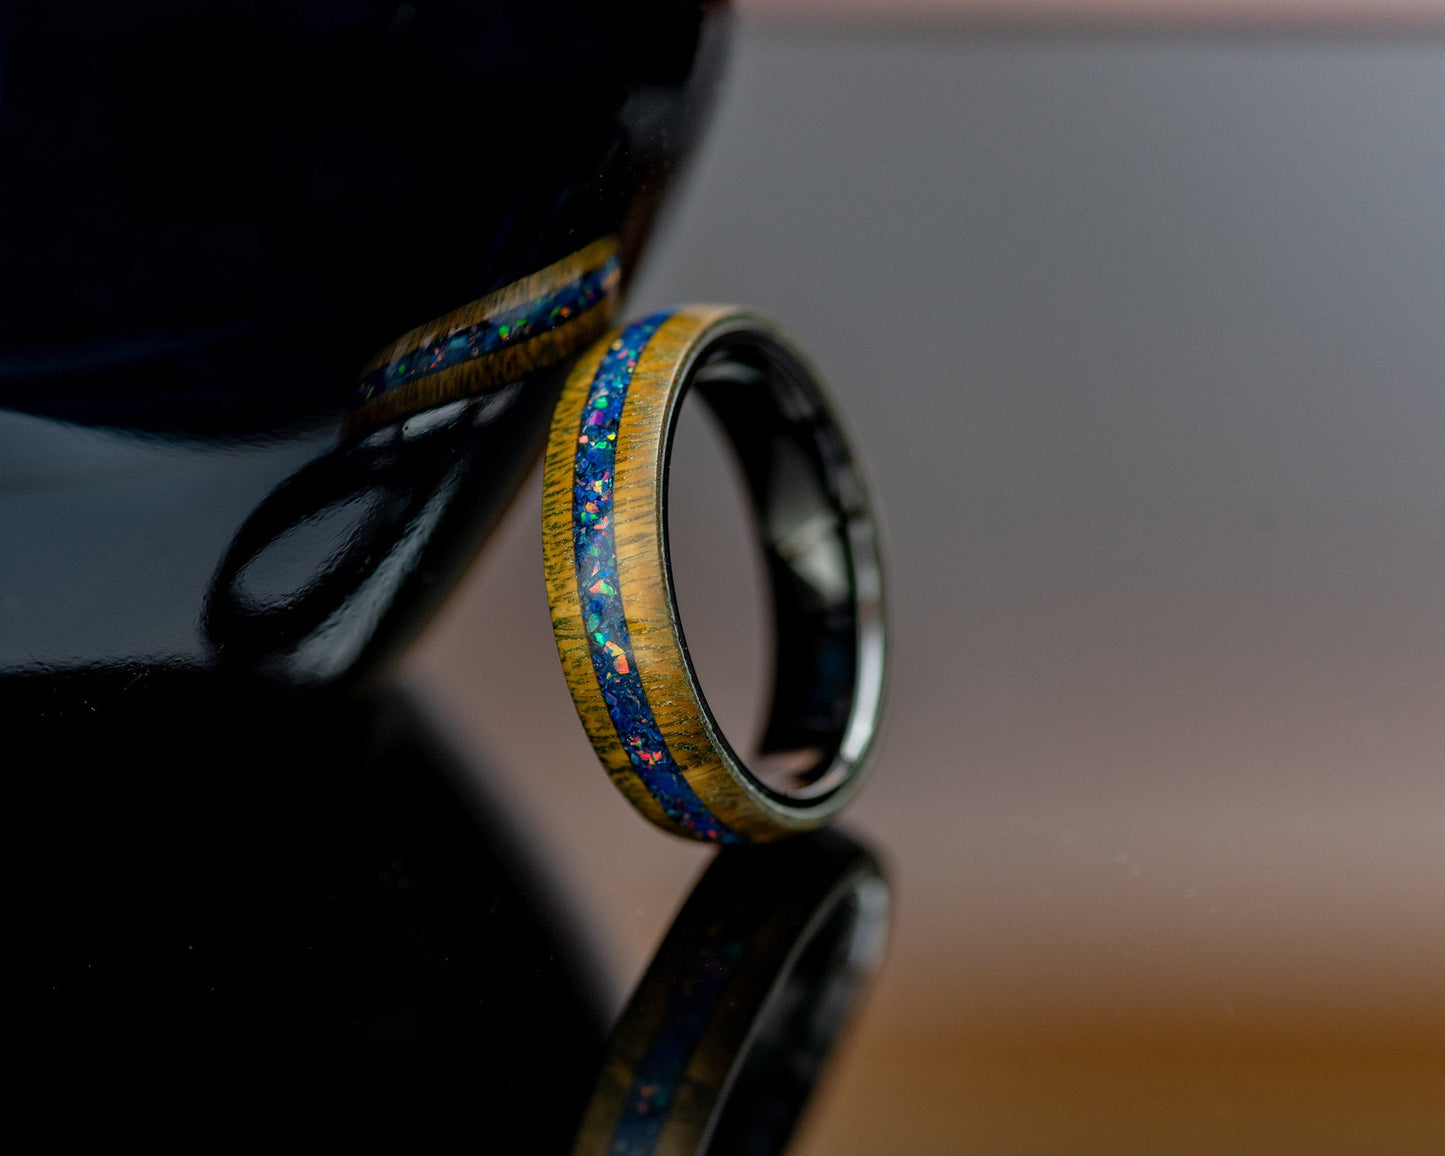 Handmade Wood & Opal Ring | Lignum Vitae Wood with Opal and Lapis Lazuli Inlay on 8mm Wide Black Ceramic Core | Handcrafted Size 11 Ring